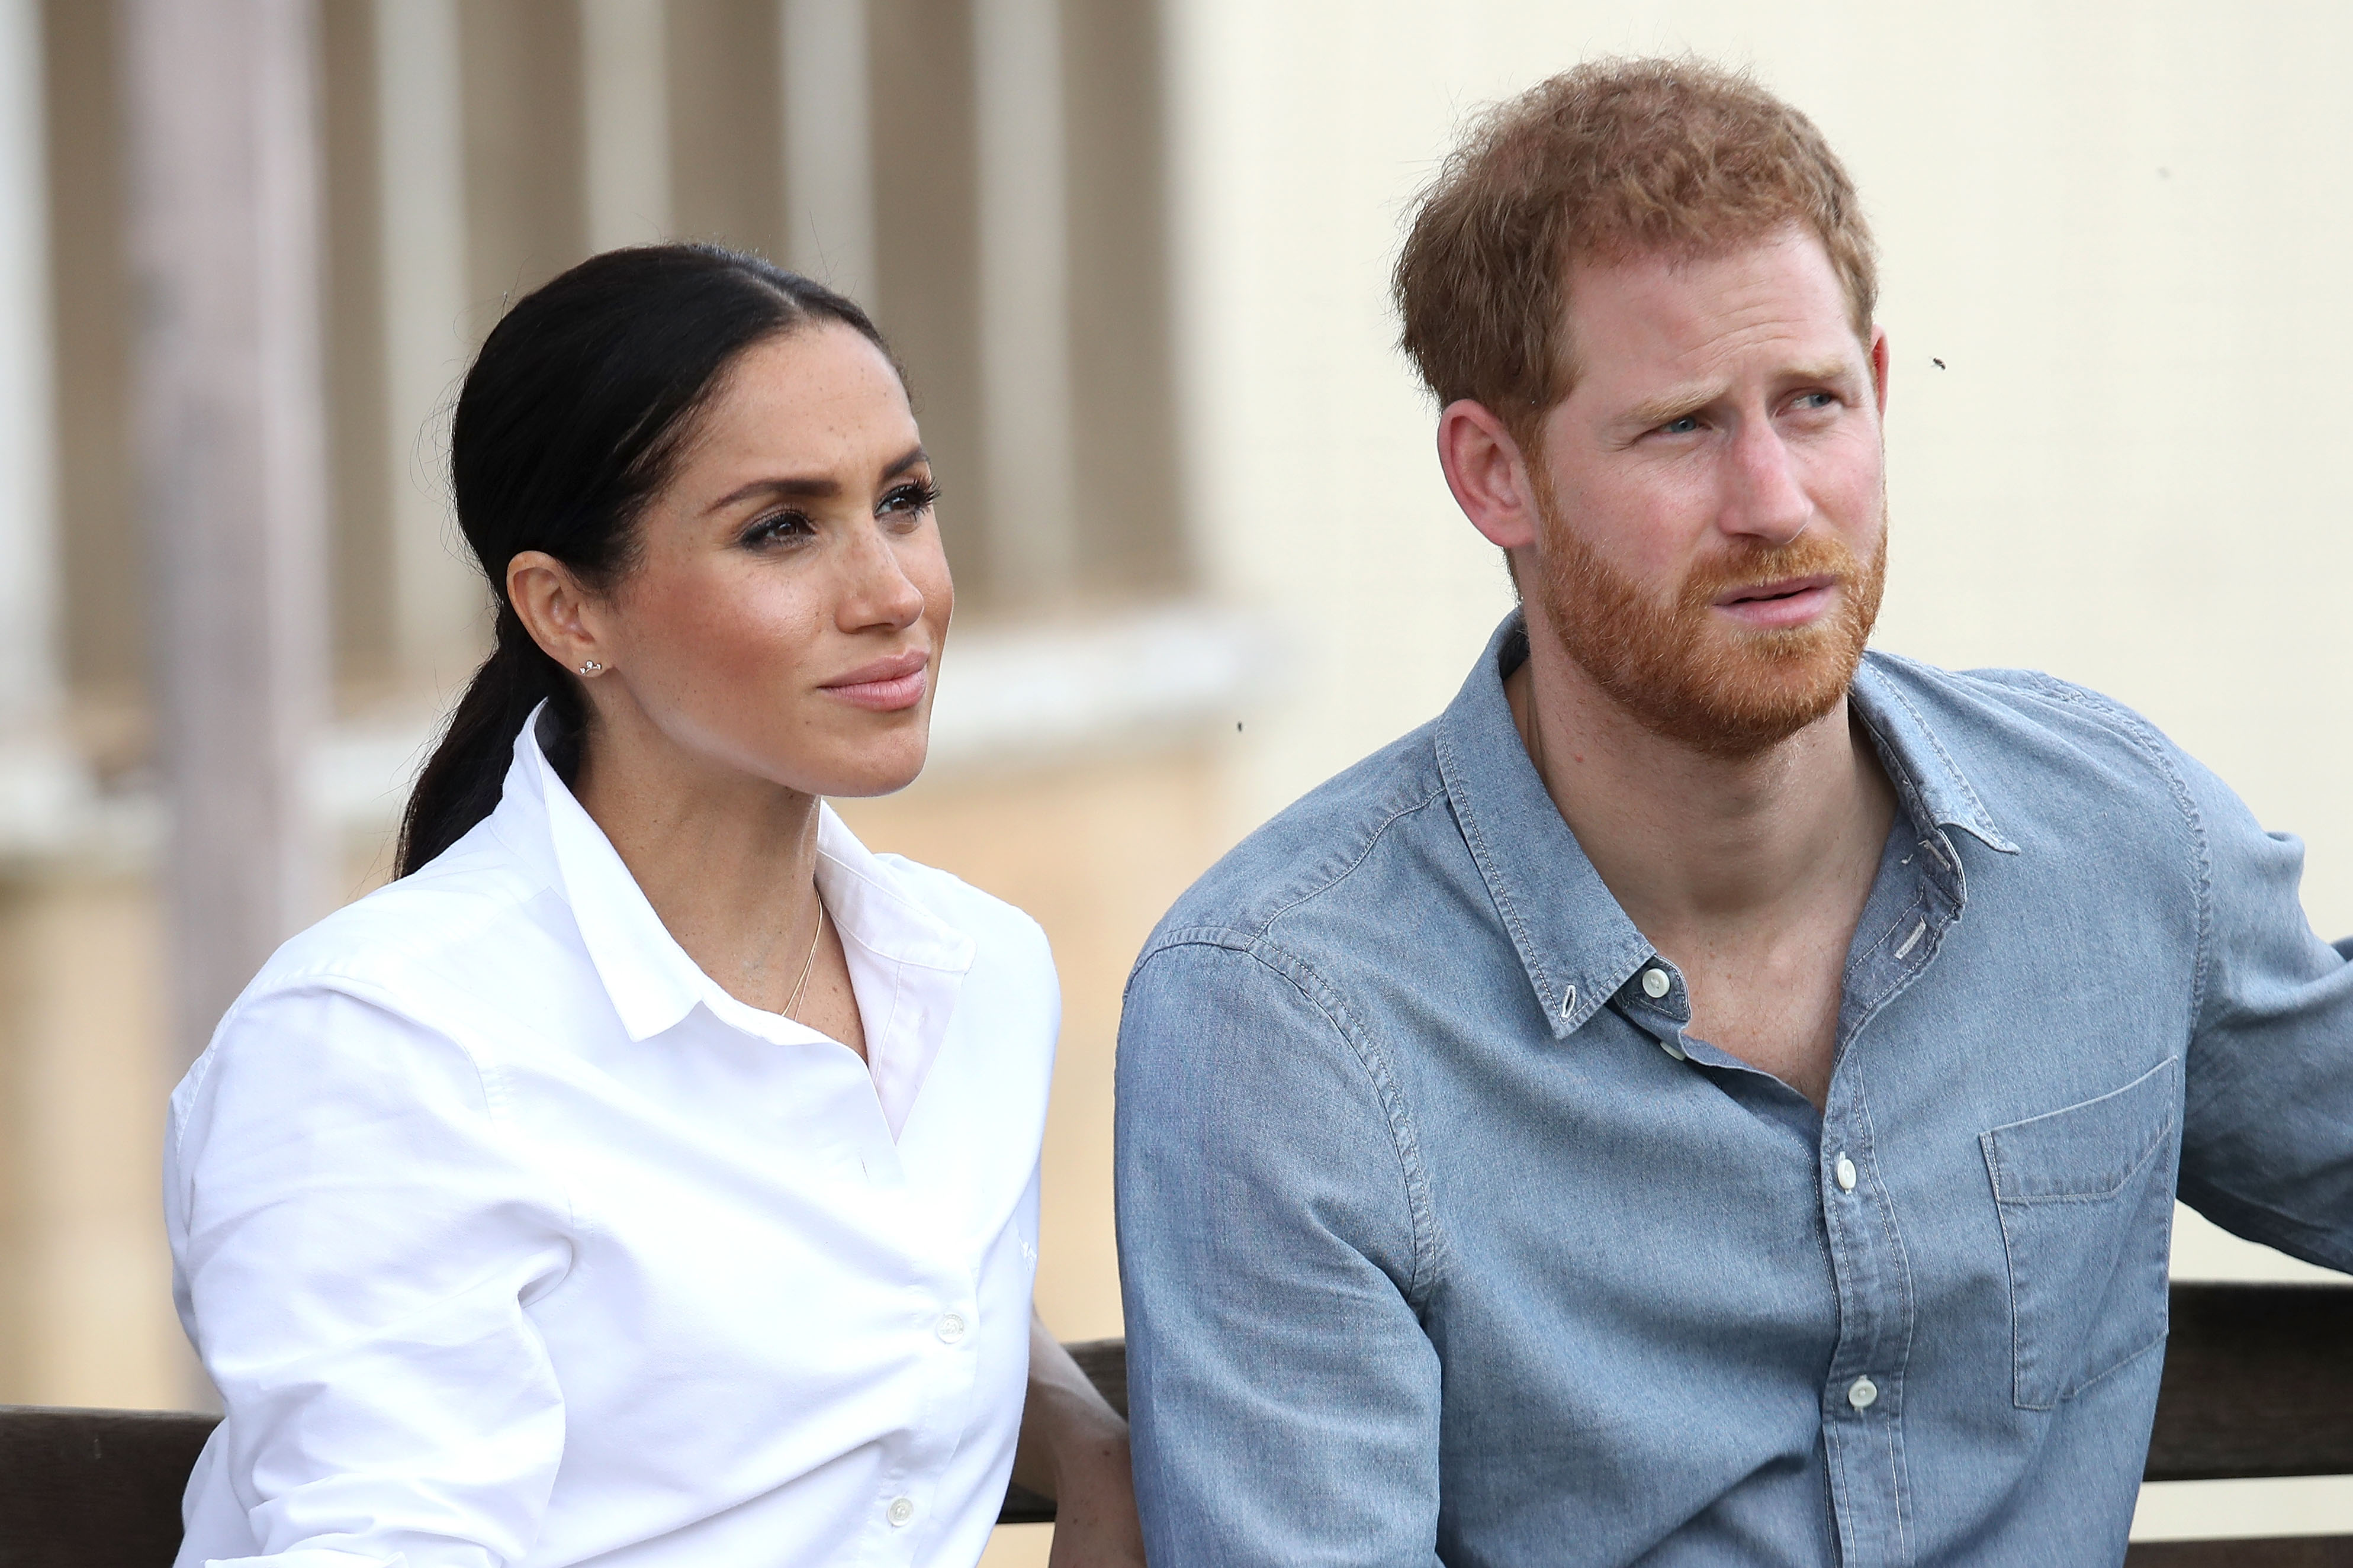 Prince Harry and Meghan Markle dressed casual and seated during a visit to a local farming family in Australia